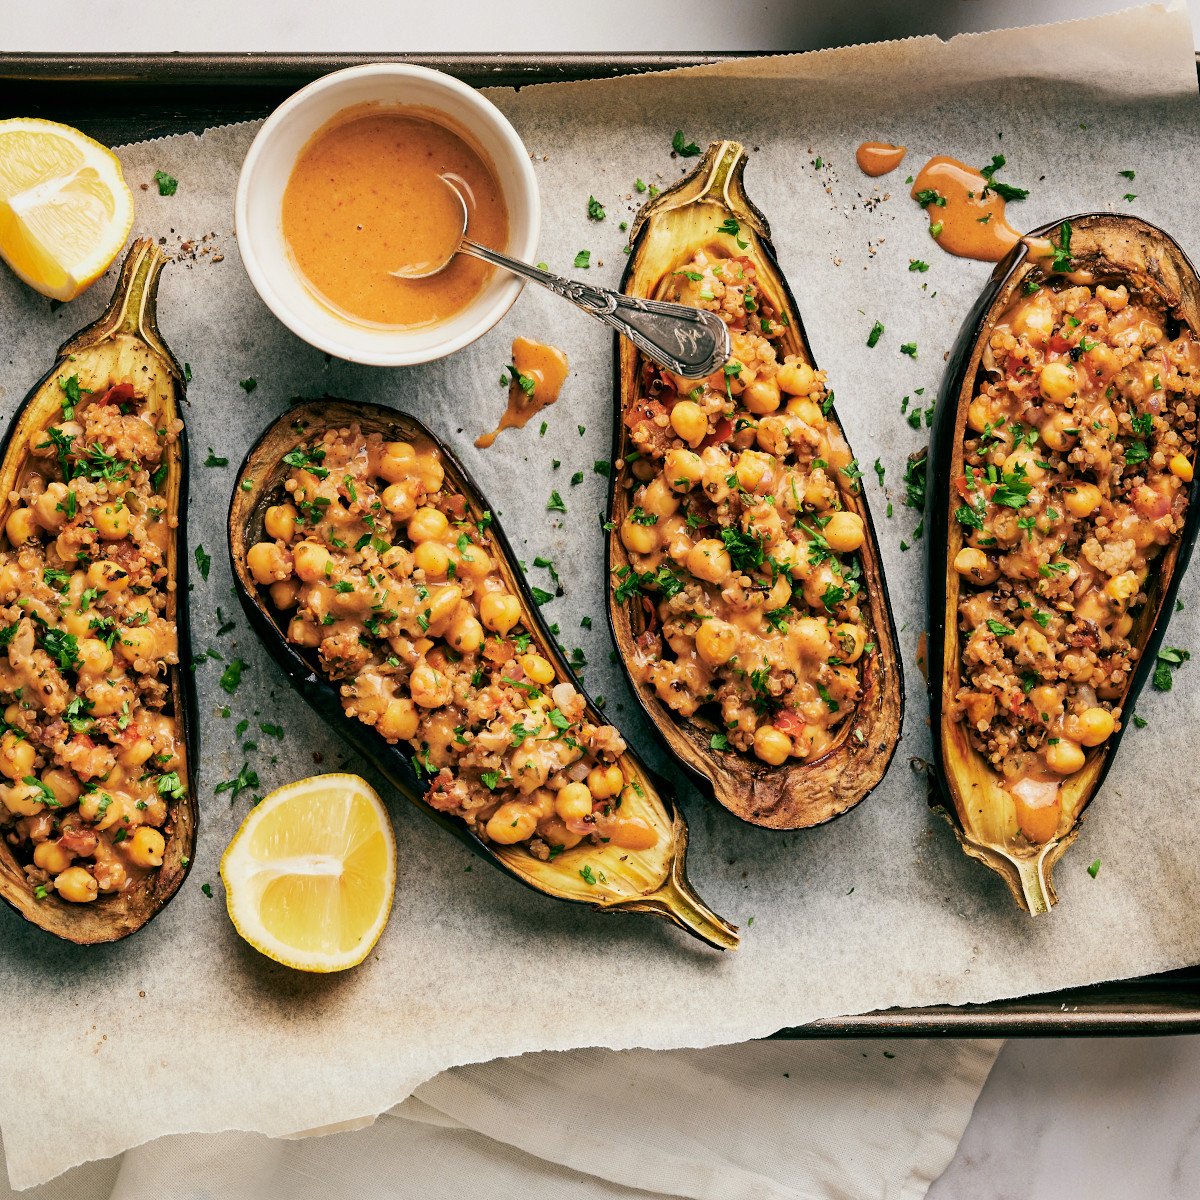 Eggplants stuffed with chickpea and quinoa filling on a baking sheet with parchment paper and a ramekin with sauce and a spoon.